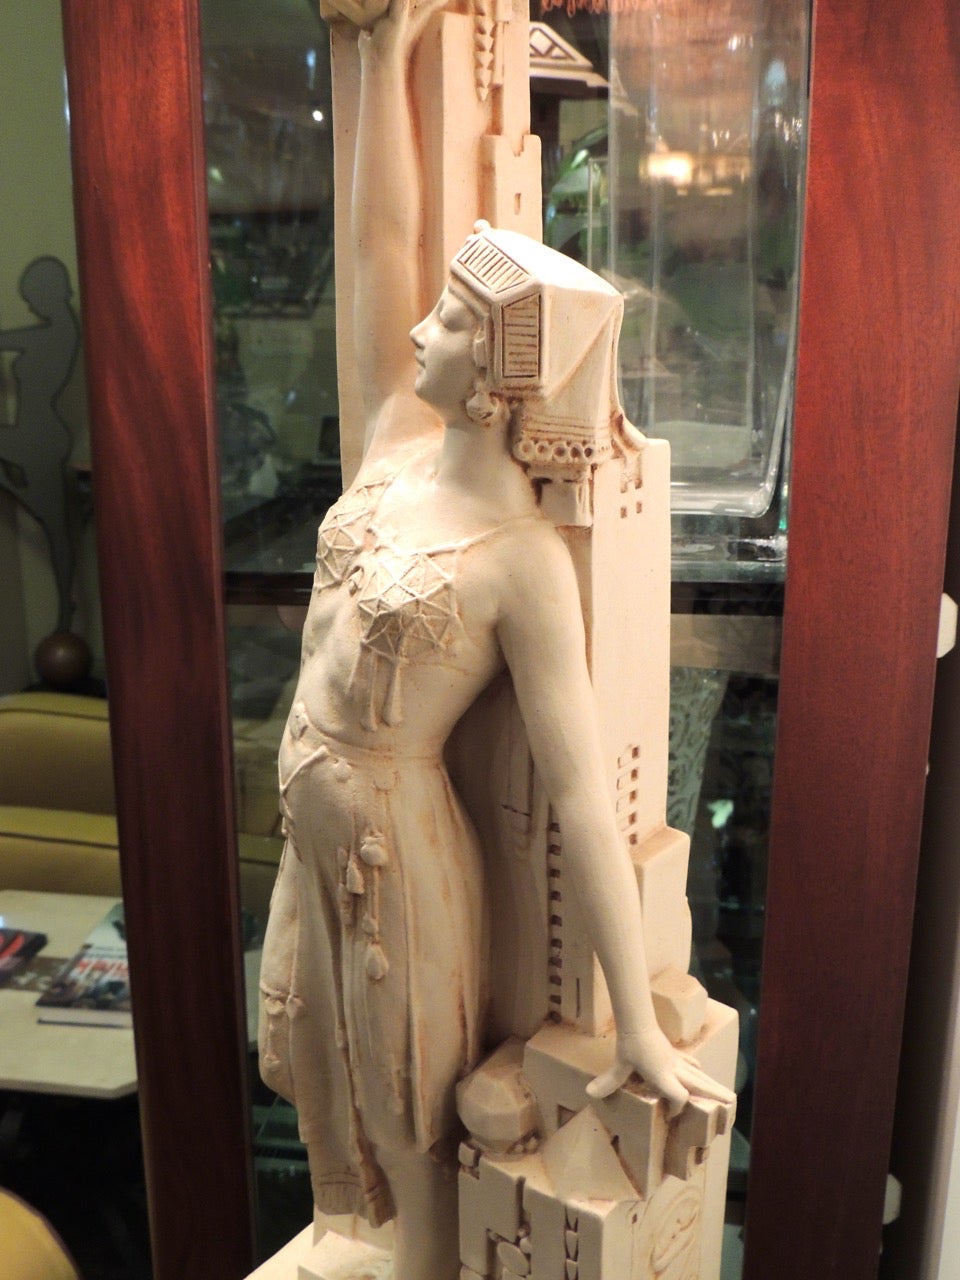 American Teco Pottery Art Deco Statue Floor Lamp by Fritz Albert and Fernand Moreau